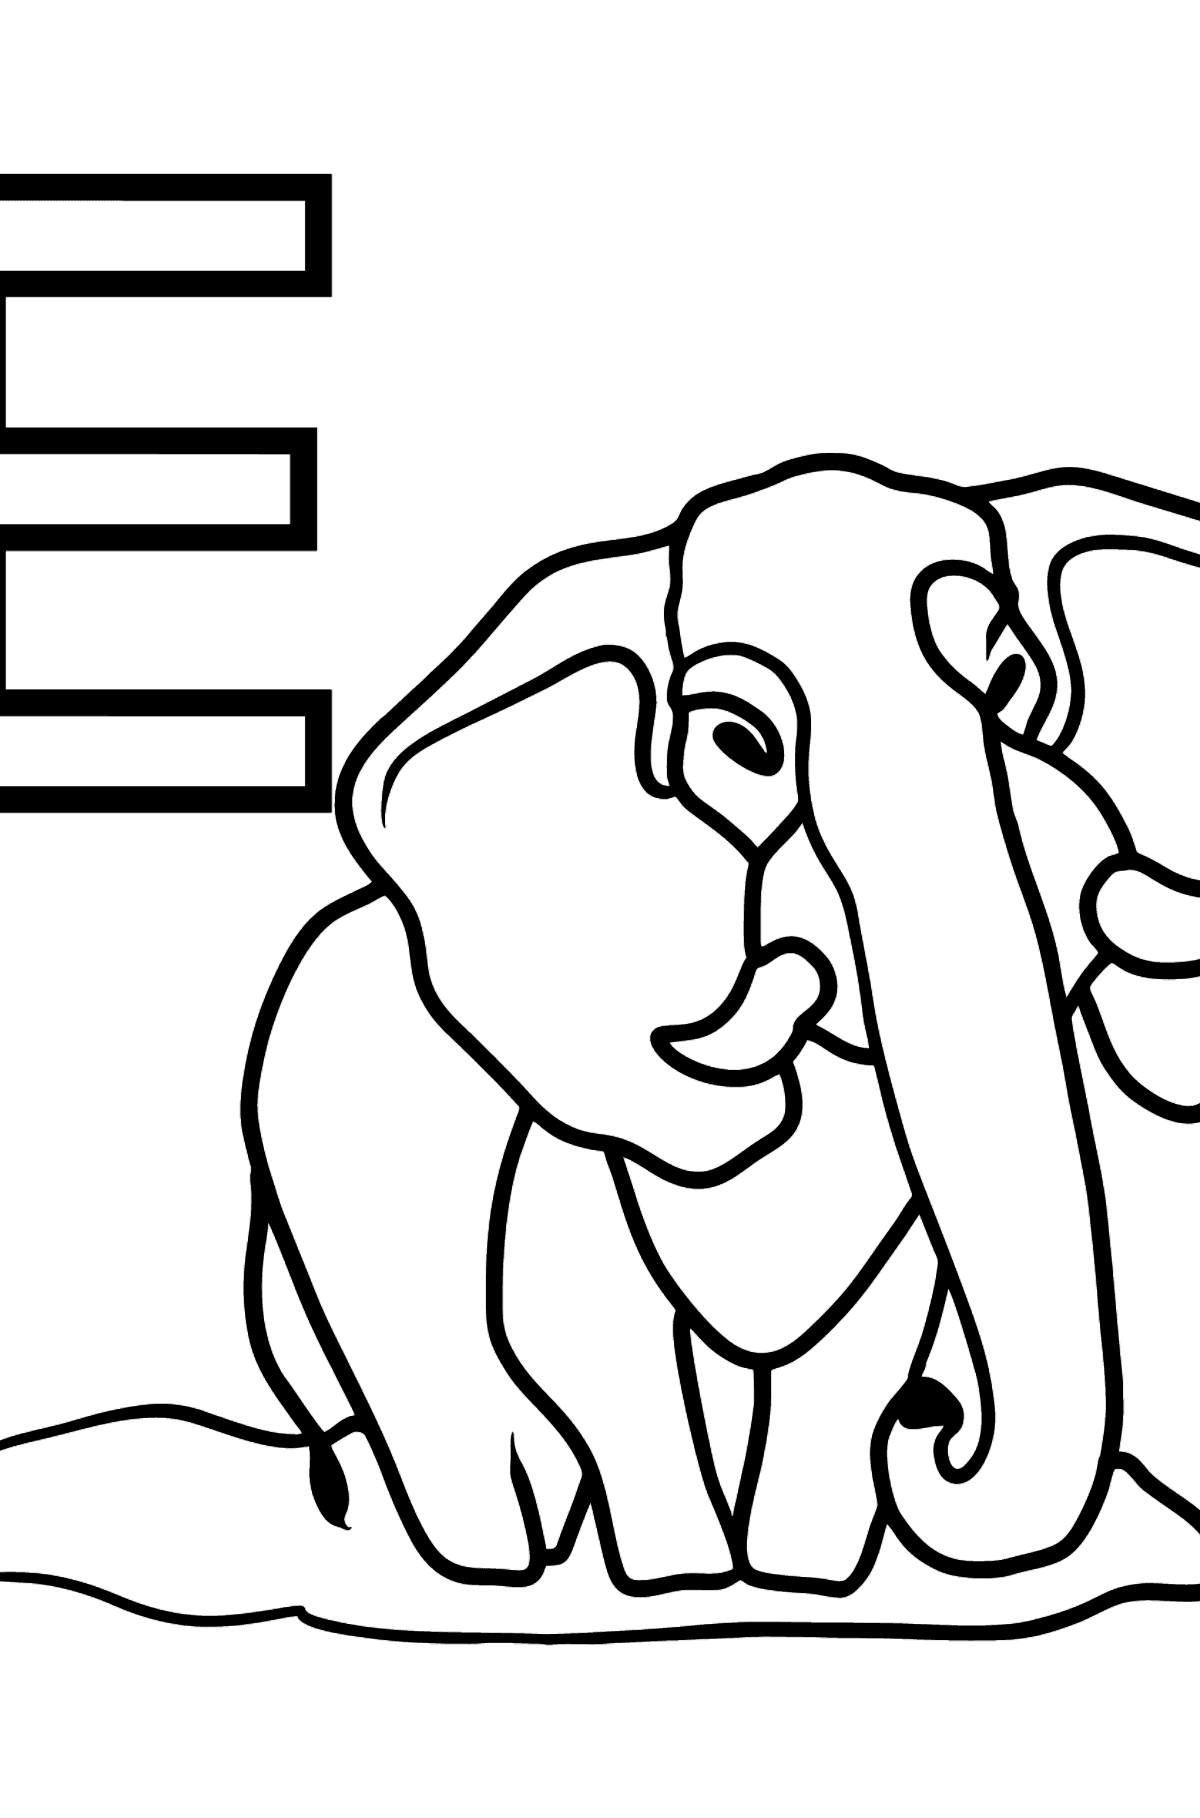 Spanish Letter E coloring pages - ELEFANTE - Coloring Pages for Kids